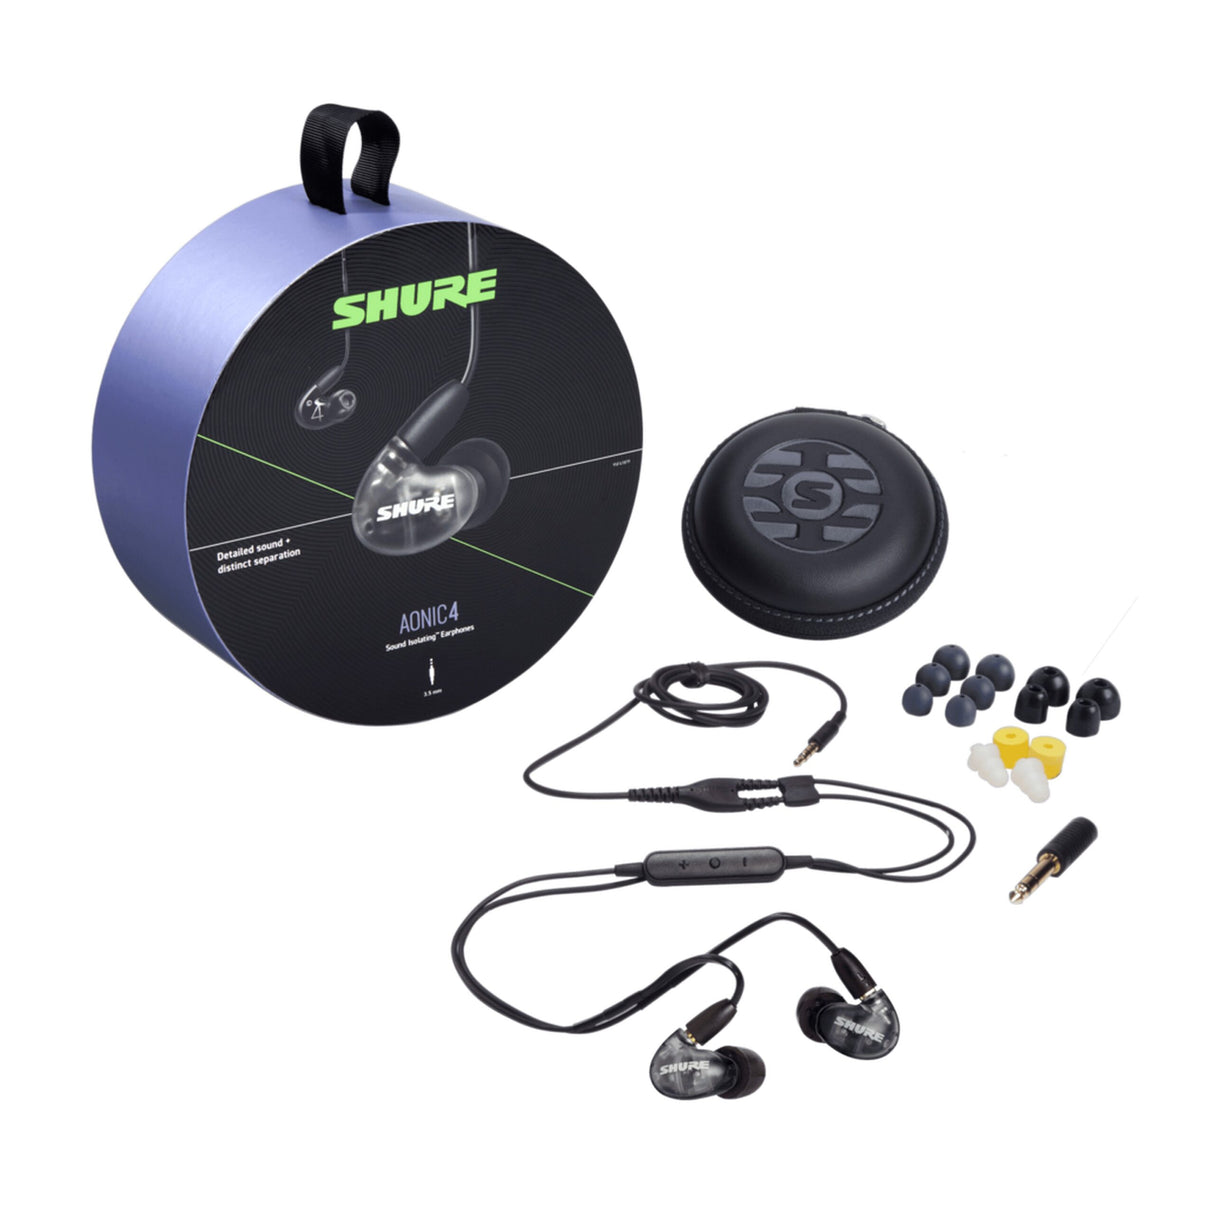 Shure AONIC 4 SE42HYBK+UNI Wired Sound Isolating In-Ear Headphone, Black/Gray (Used)